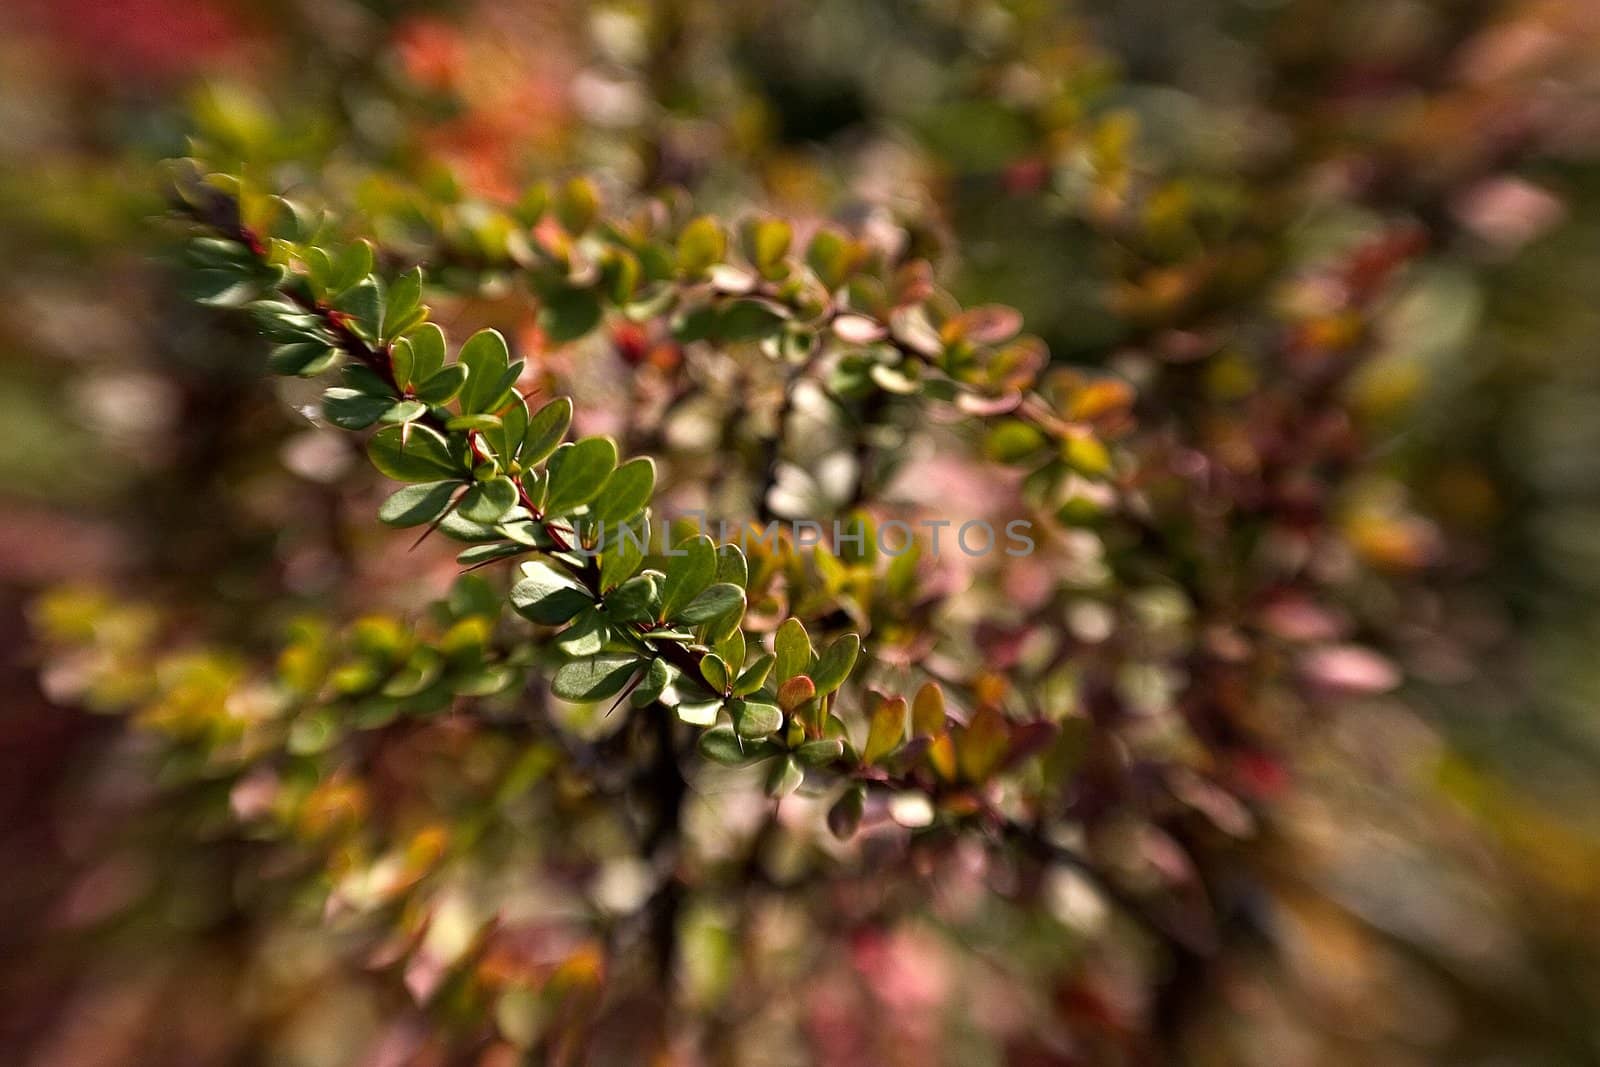 beautiful color effect of the blurred background lensbaby 

